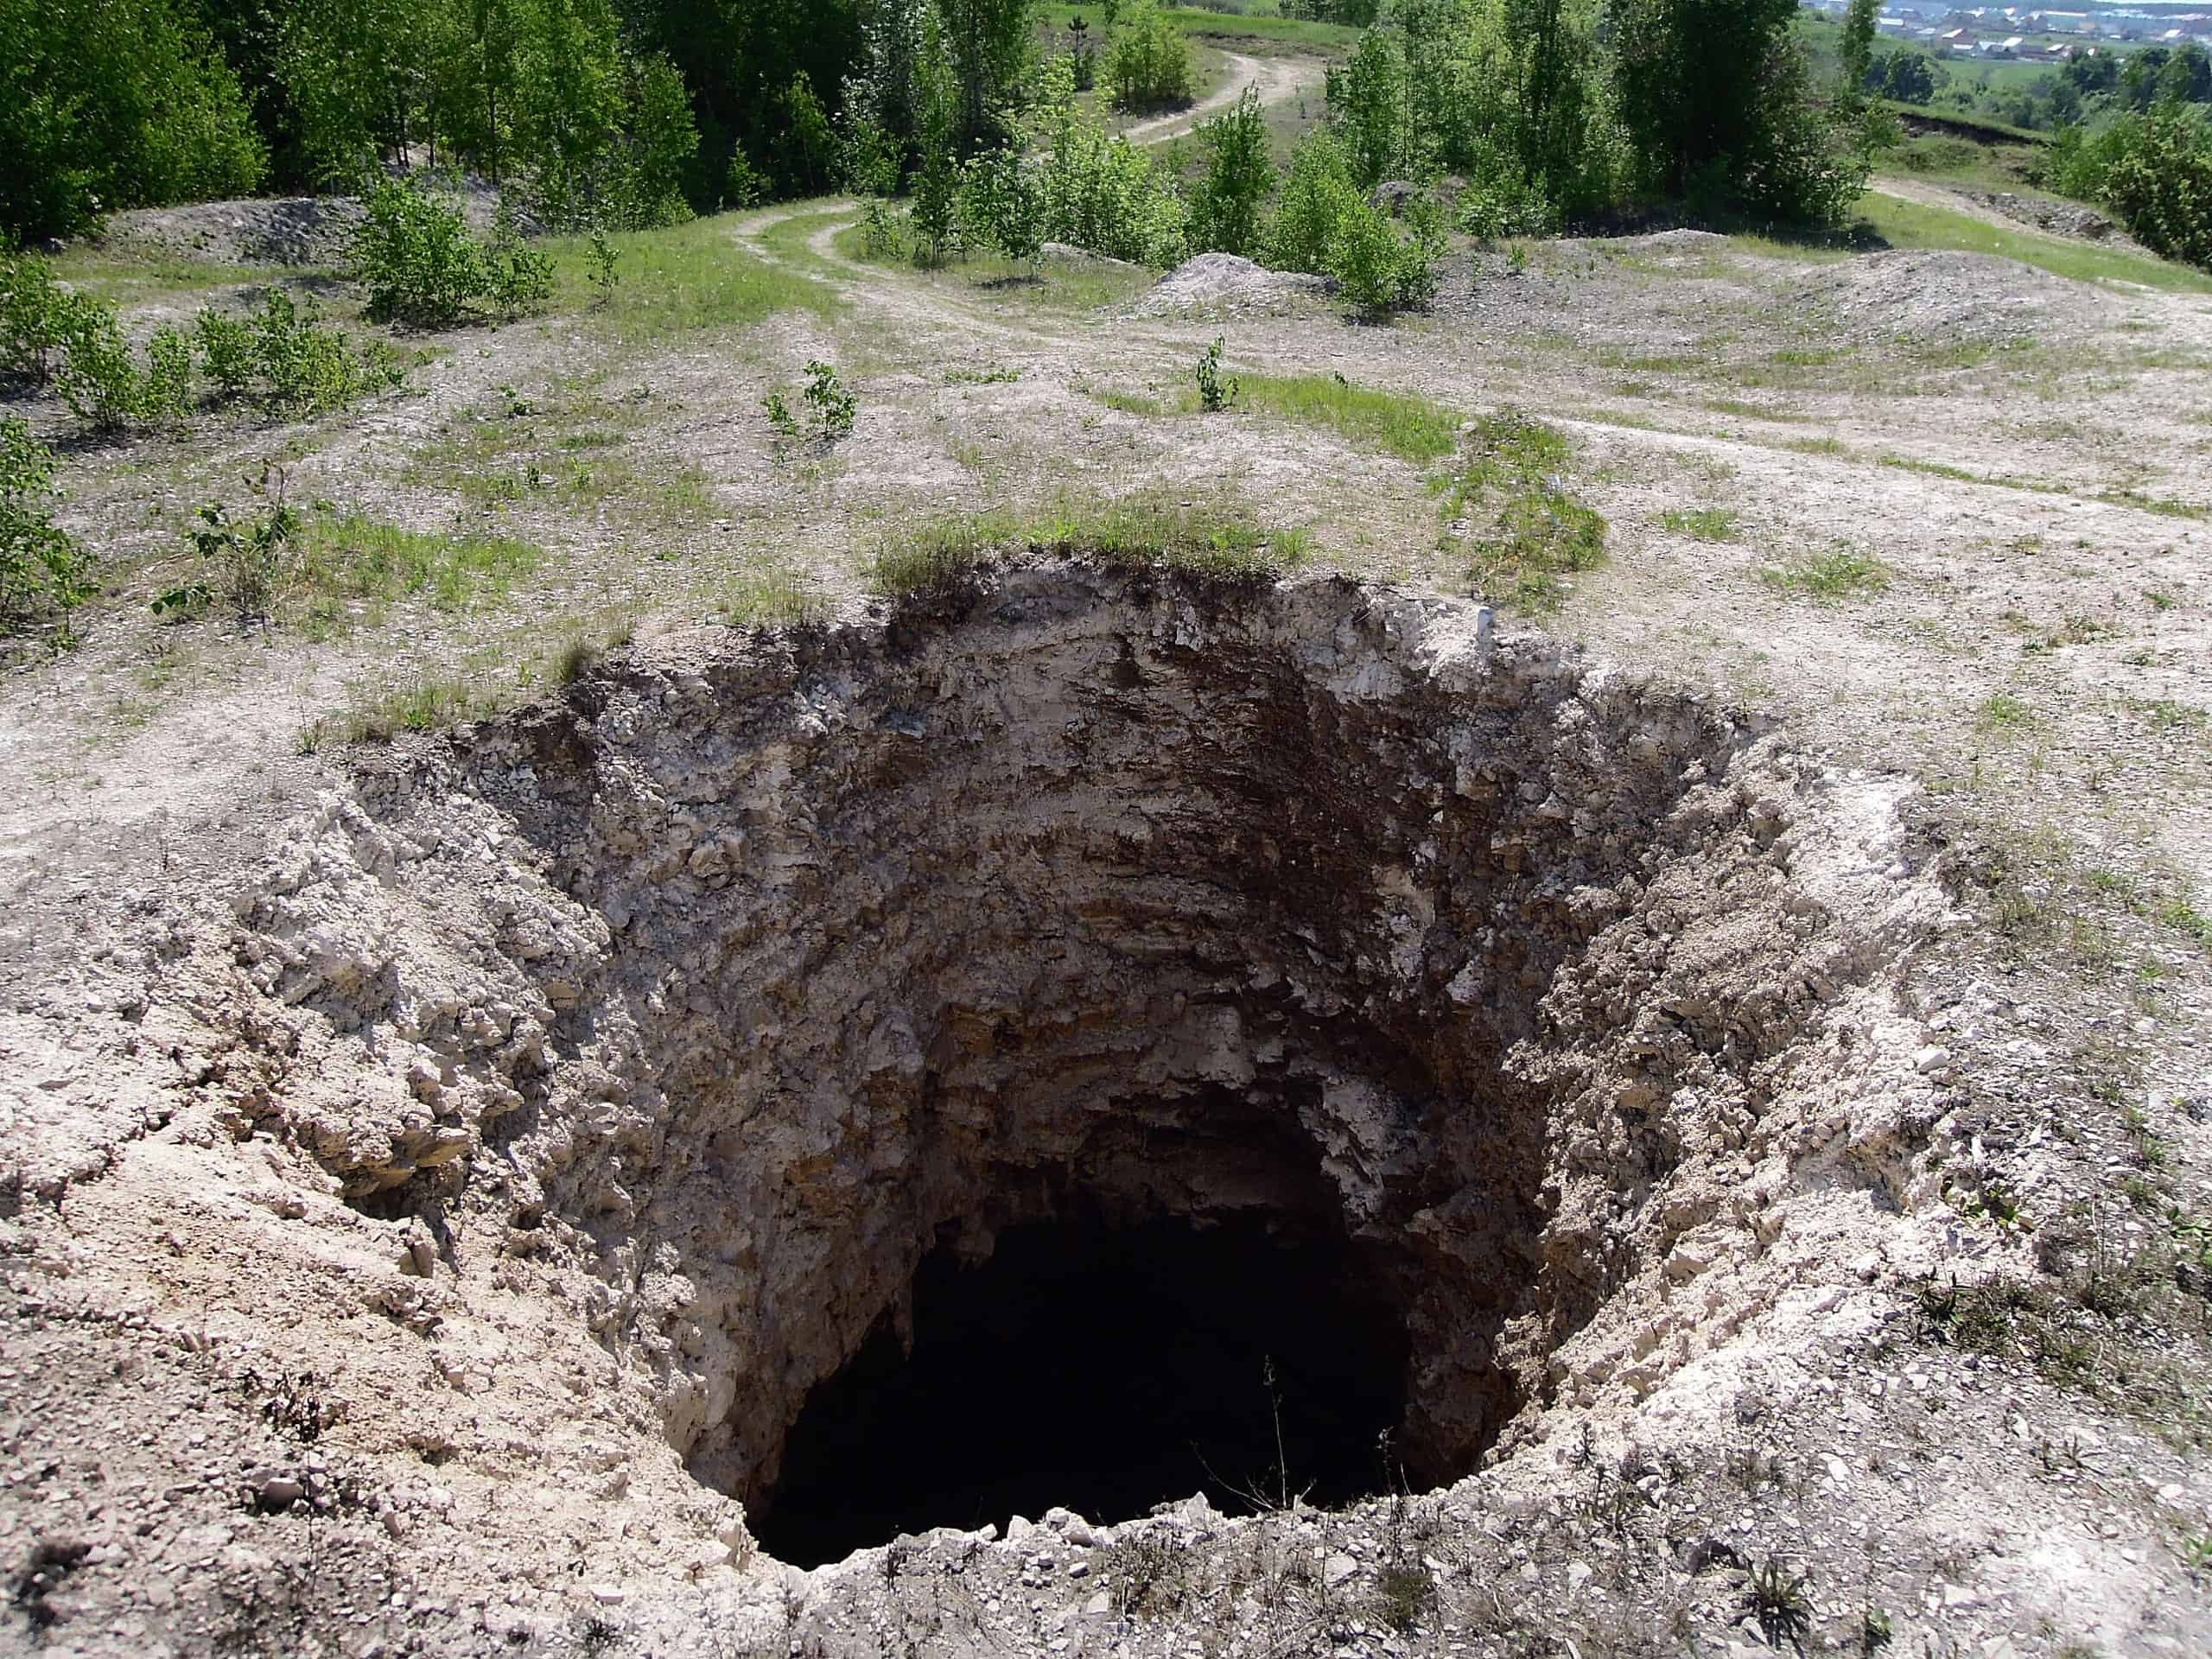 Photos Show the Deepest and Largest Man-Made Holes Around the World